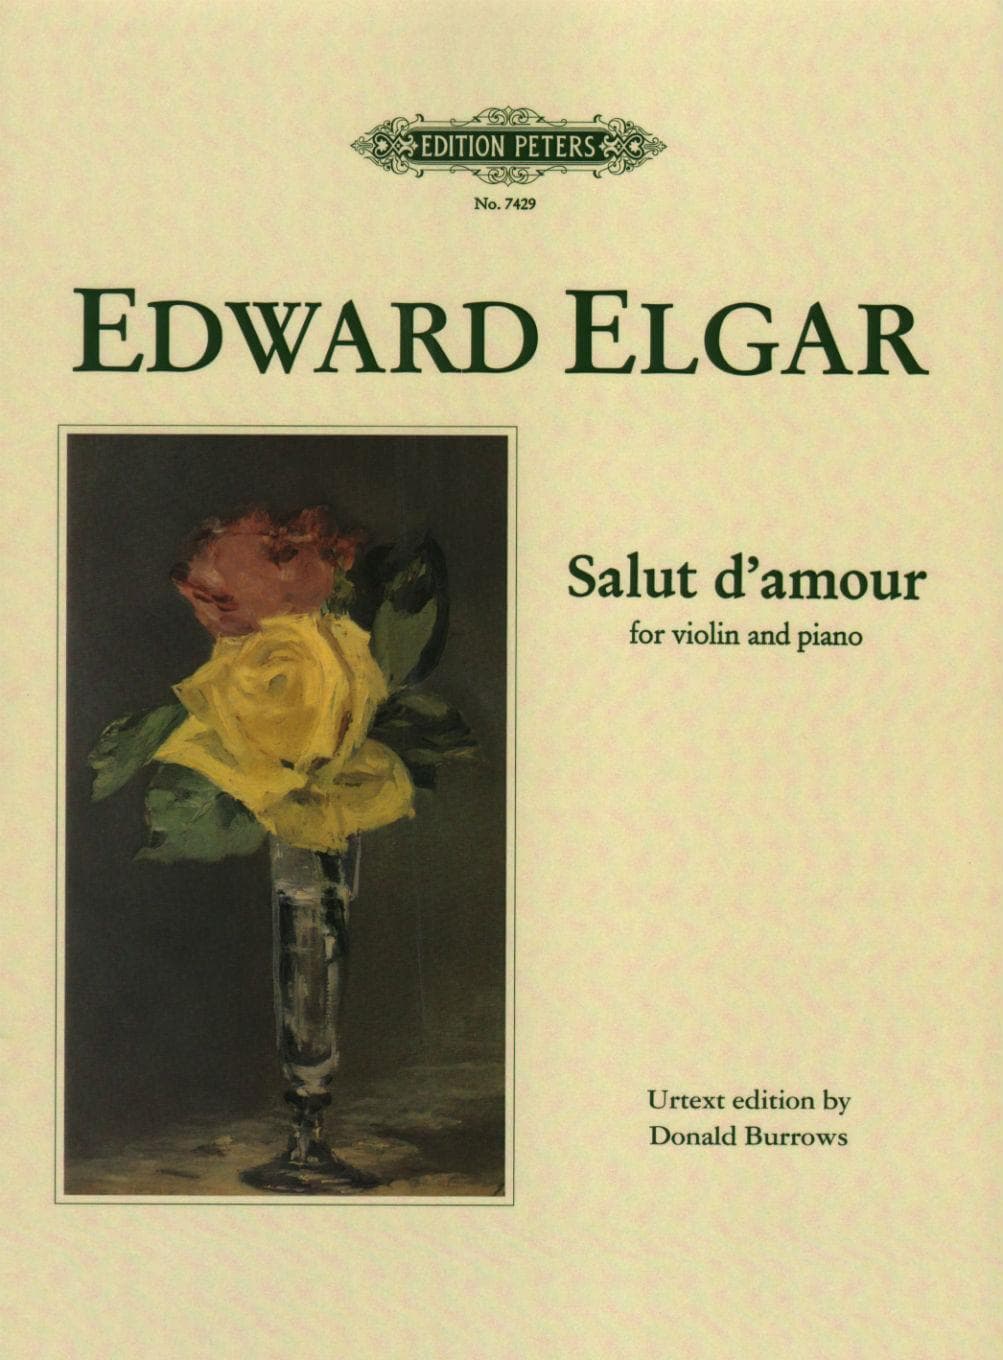 Elgar, Edward - Salut d'amour, Op 12 - Violin and Piano - edited by Donald Burrows - Edition Peters URTEXT